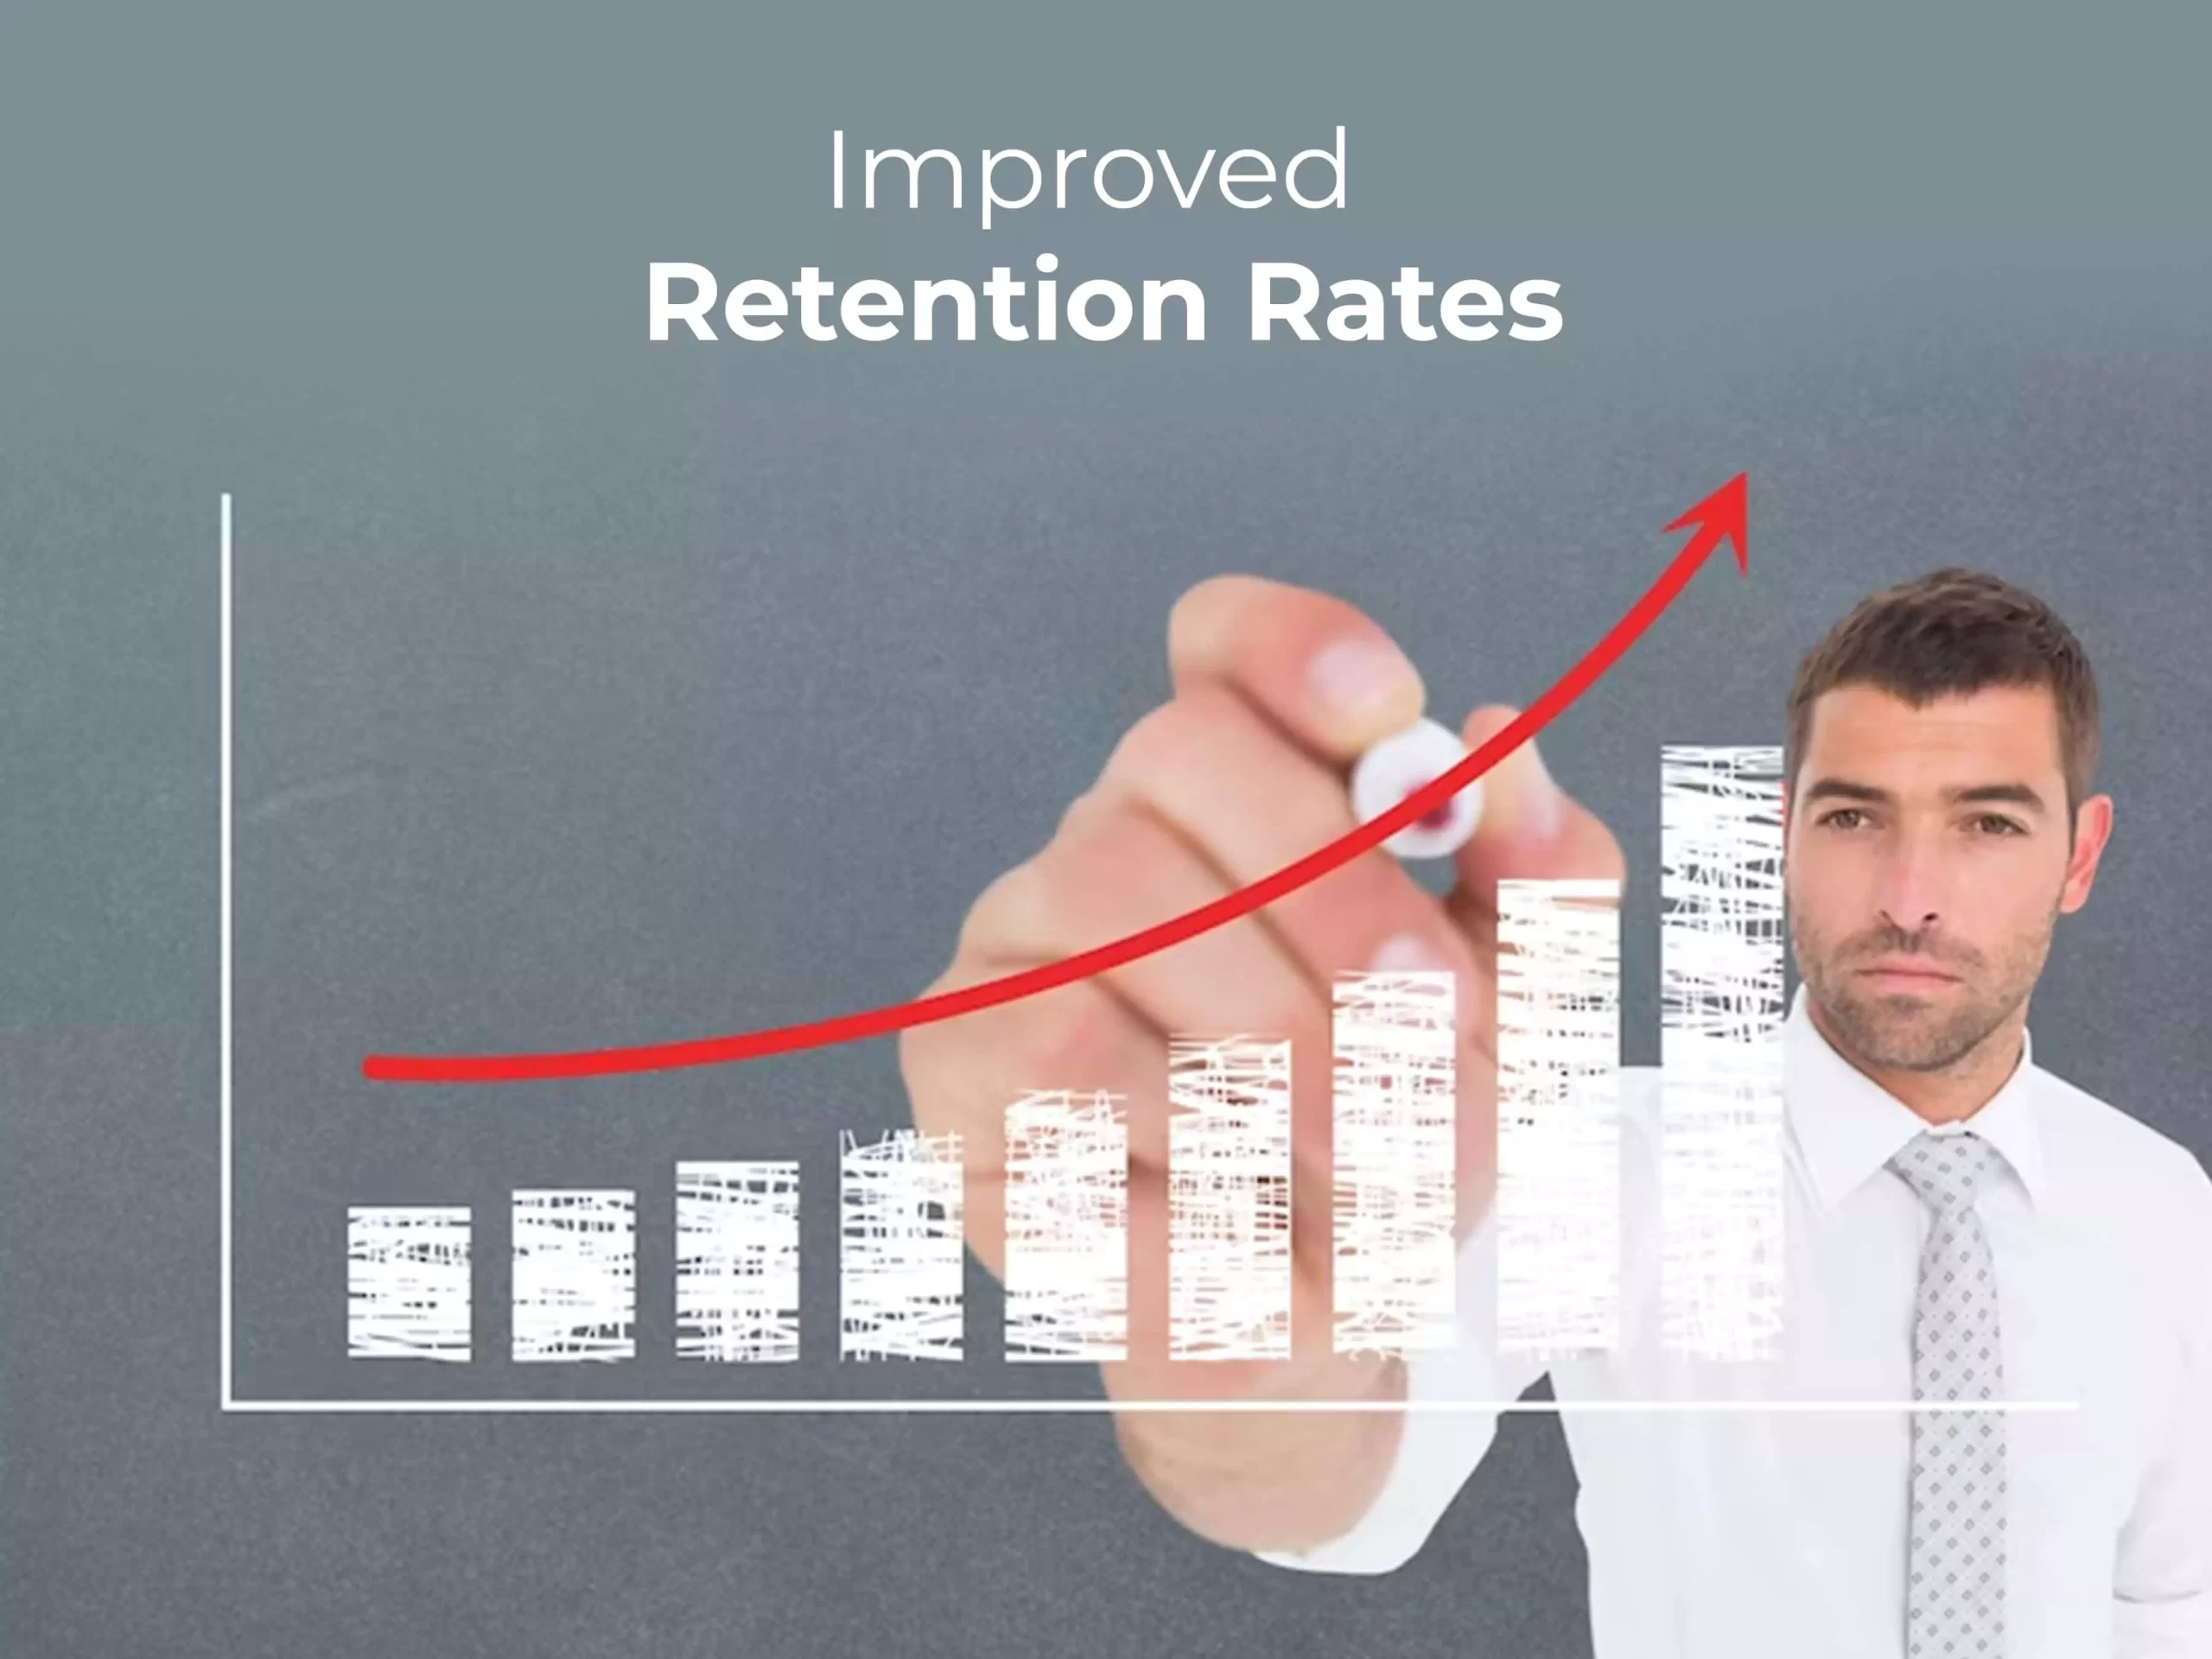 Improved retention rates